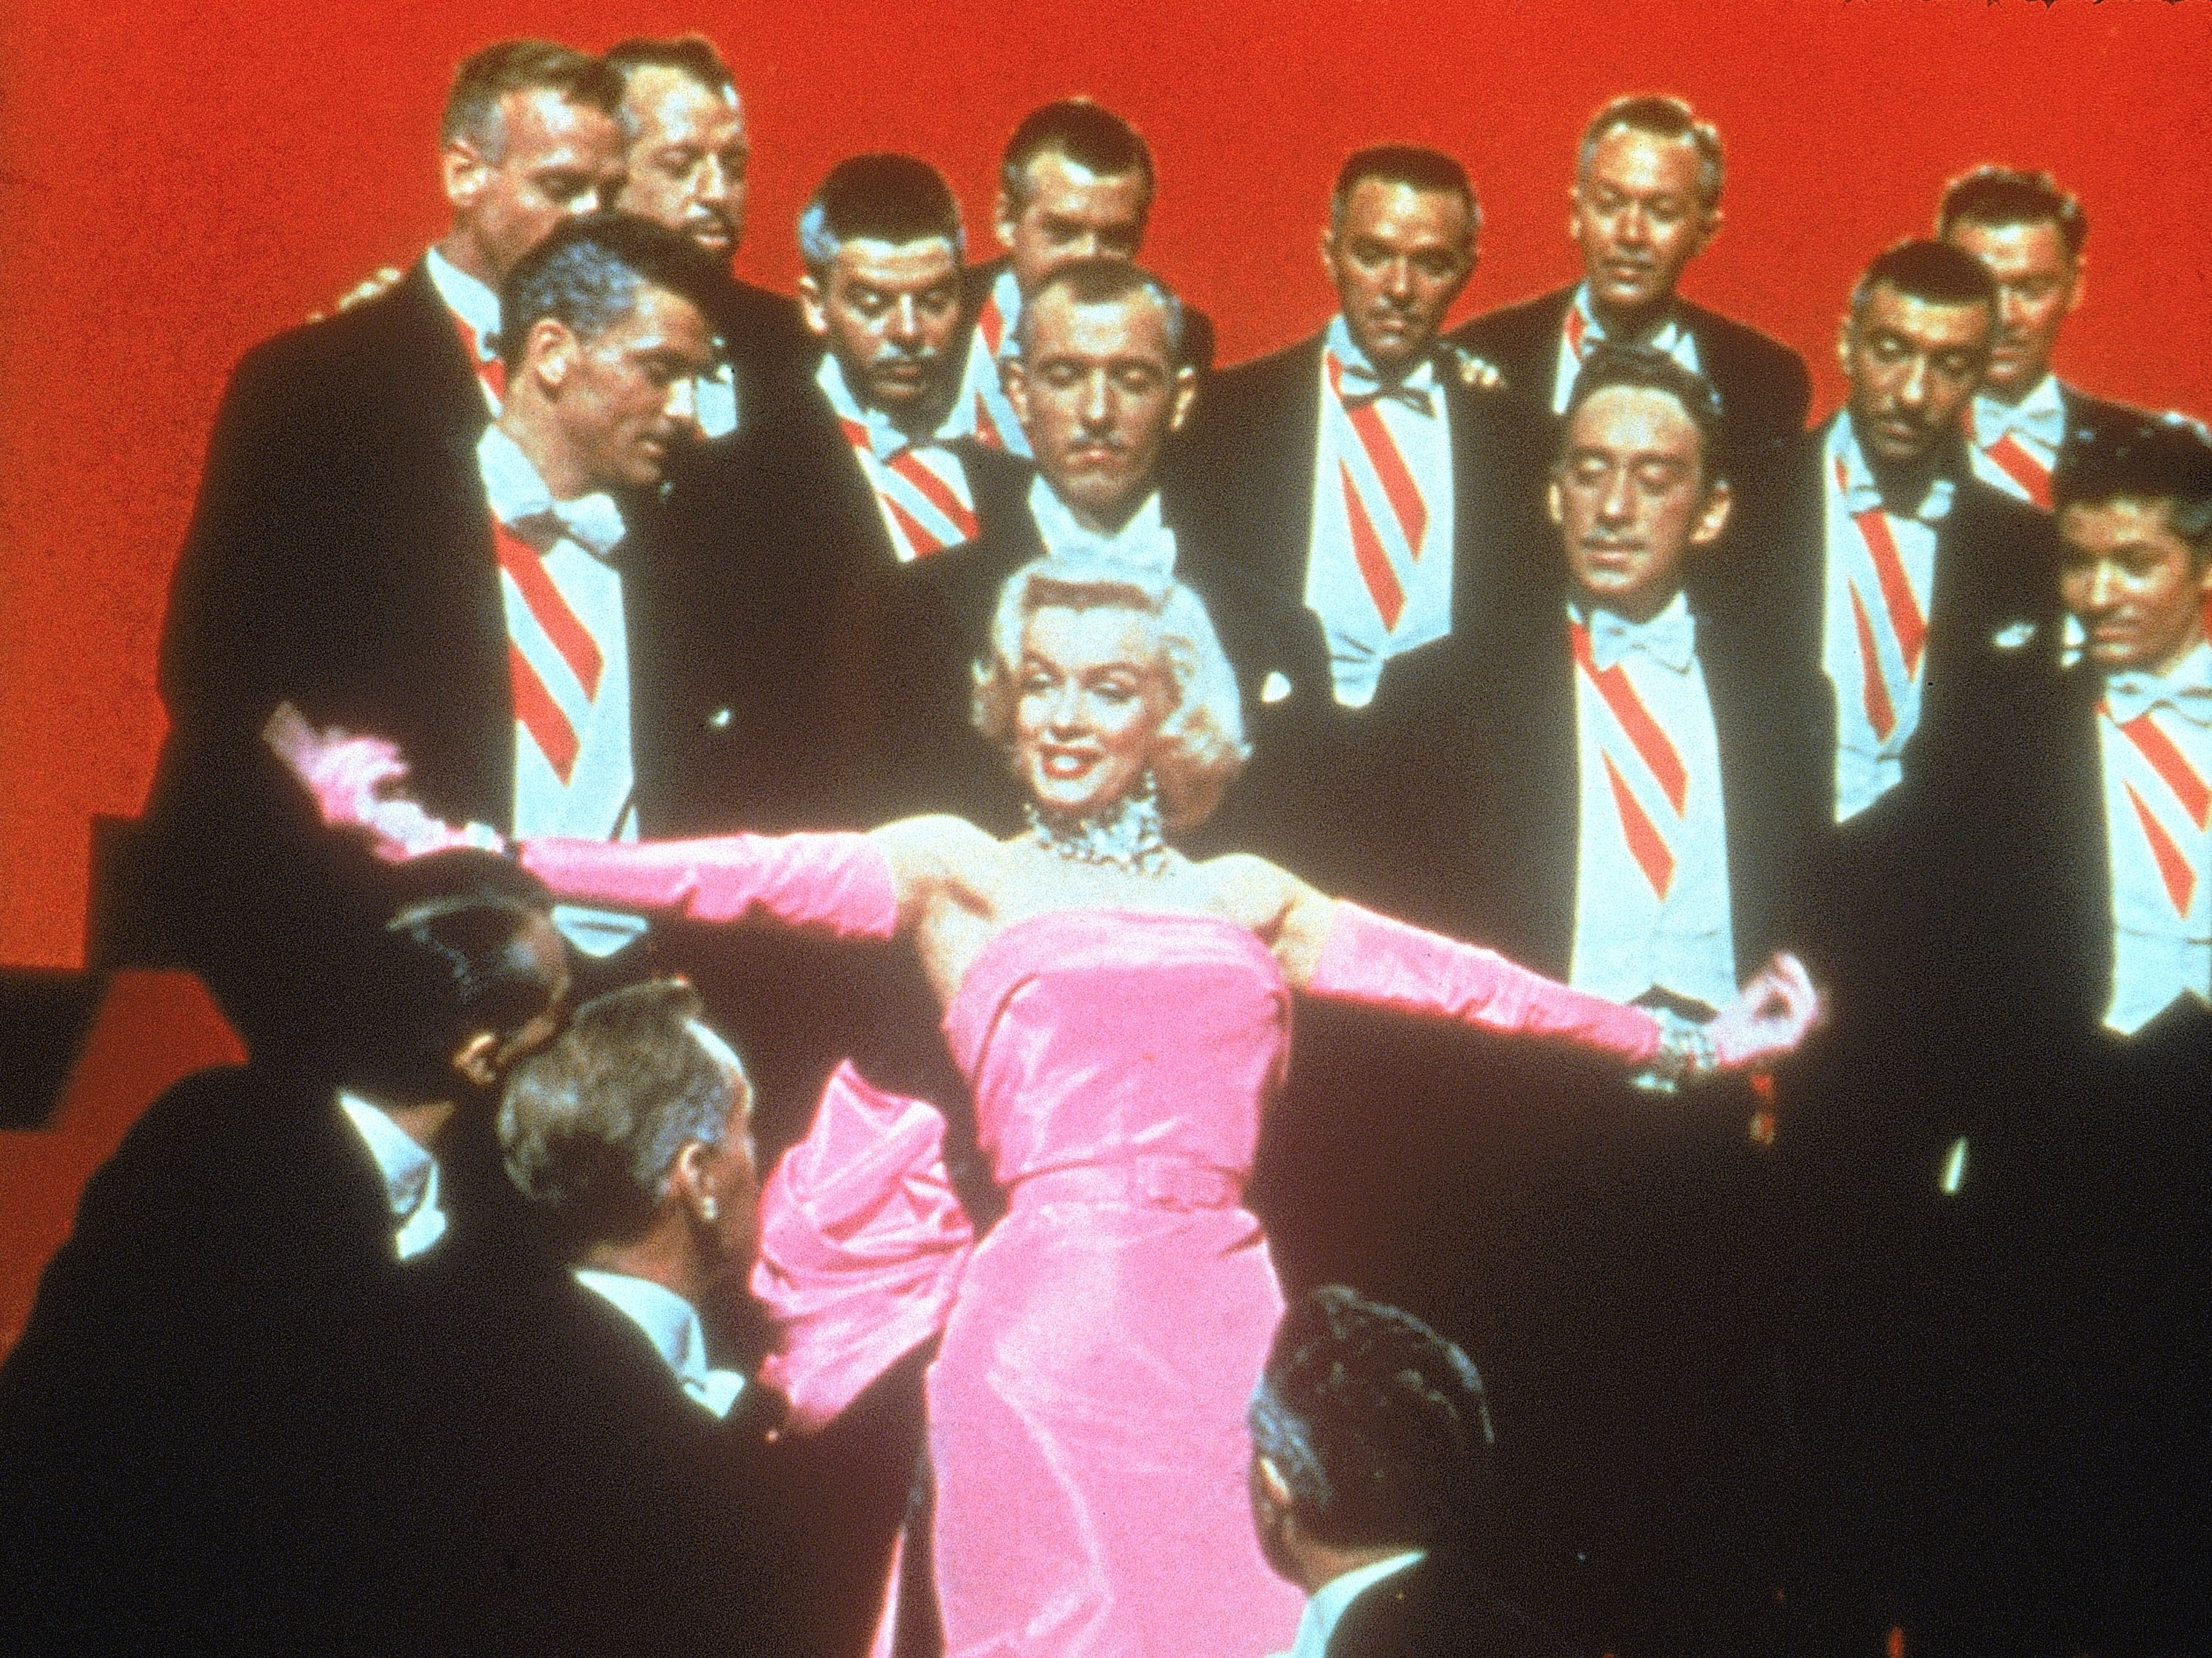 Marilyn Monroe's 10 best performances, from Monkey Business to